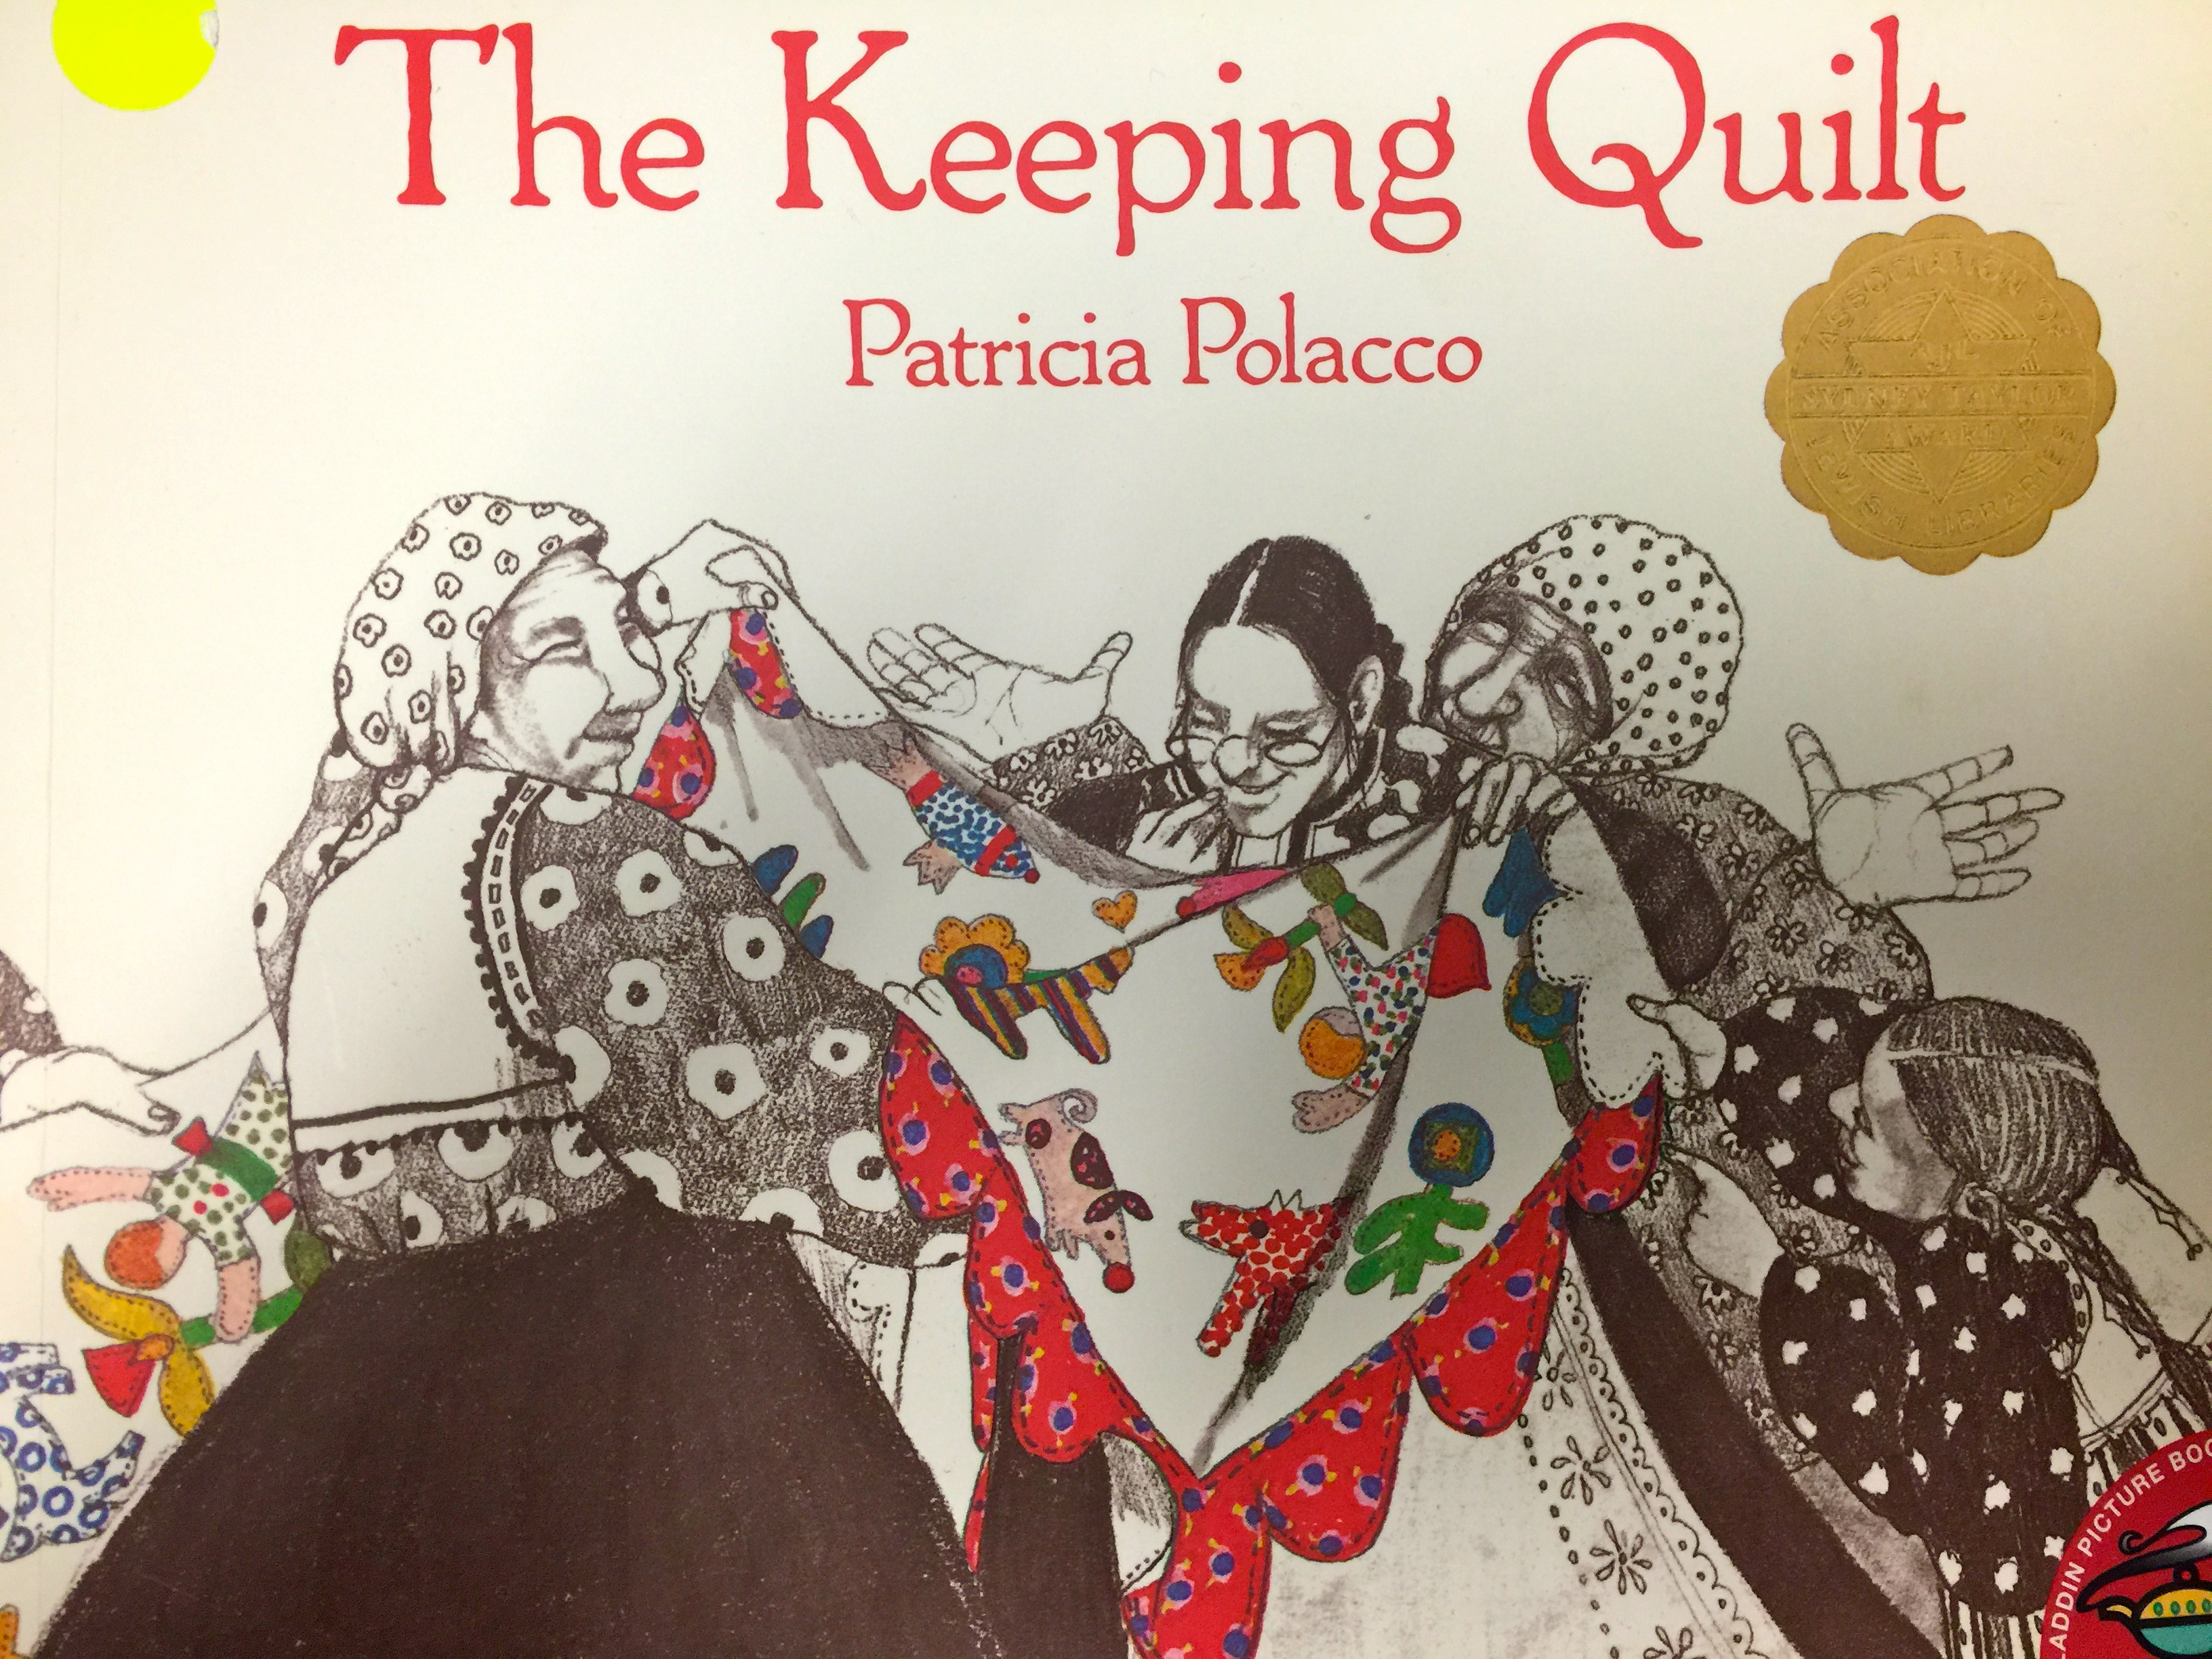 “The Keeping Quilt” By Patricia Polacco | PS373 @ PS 48 Cultural Arts Blog